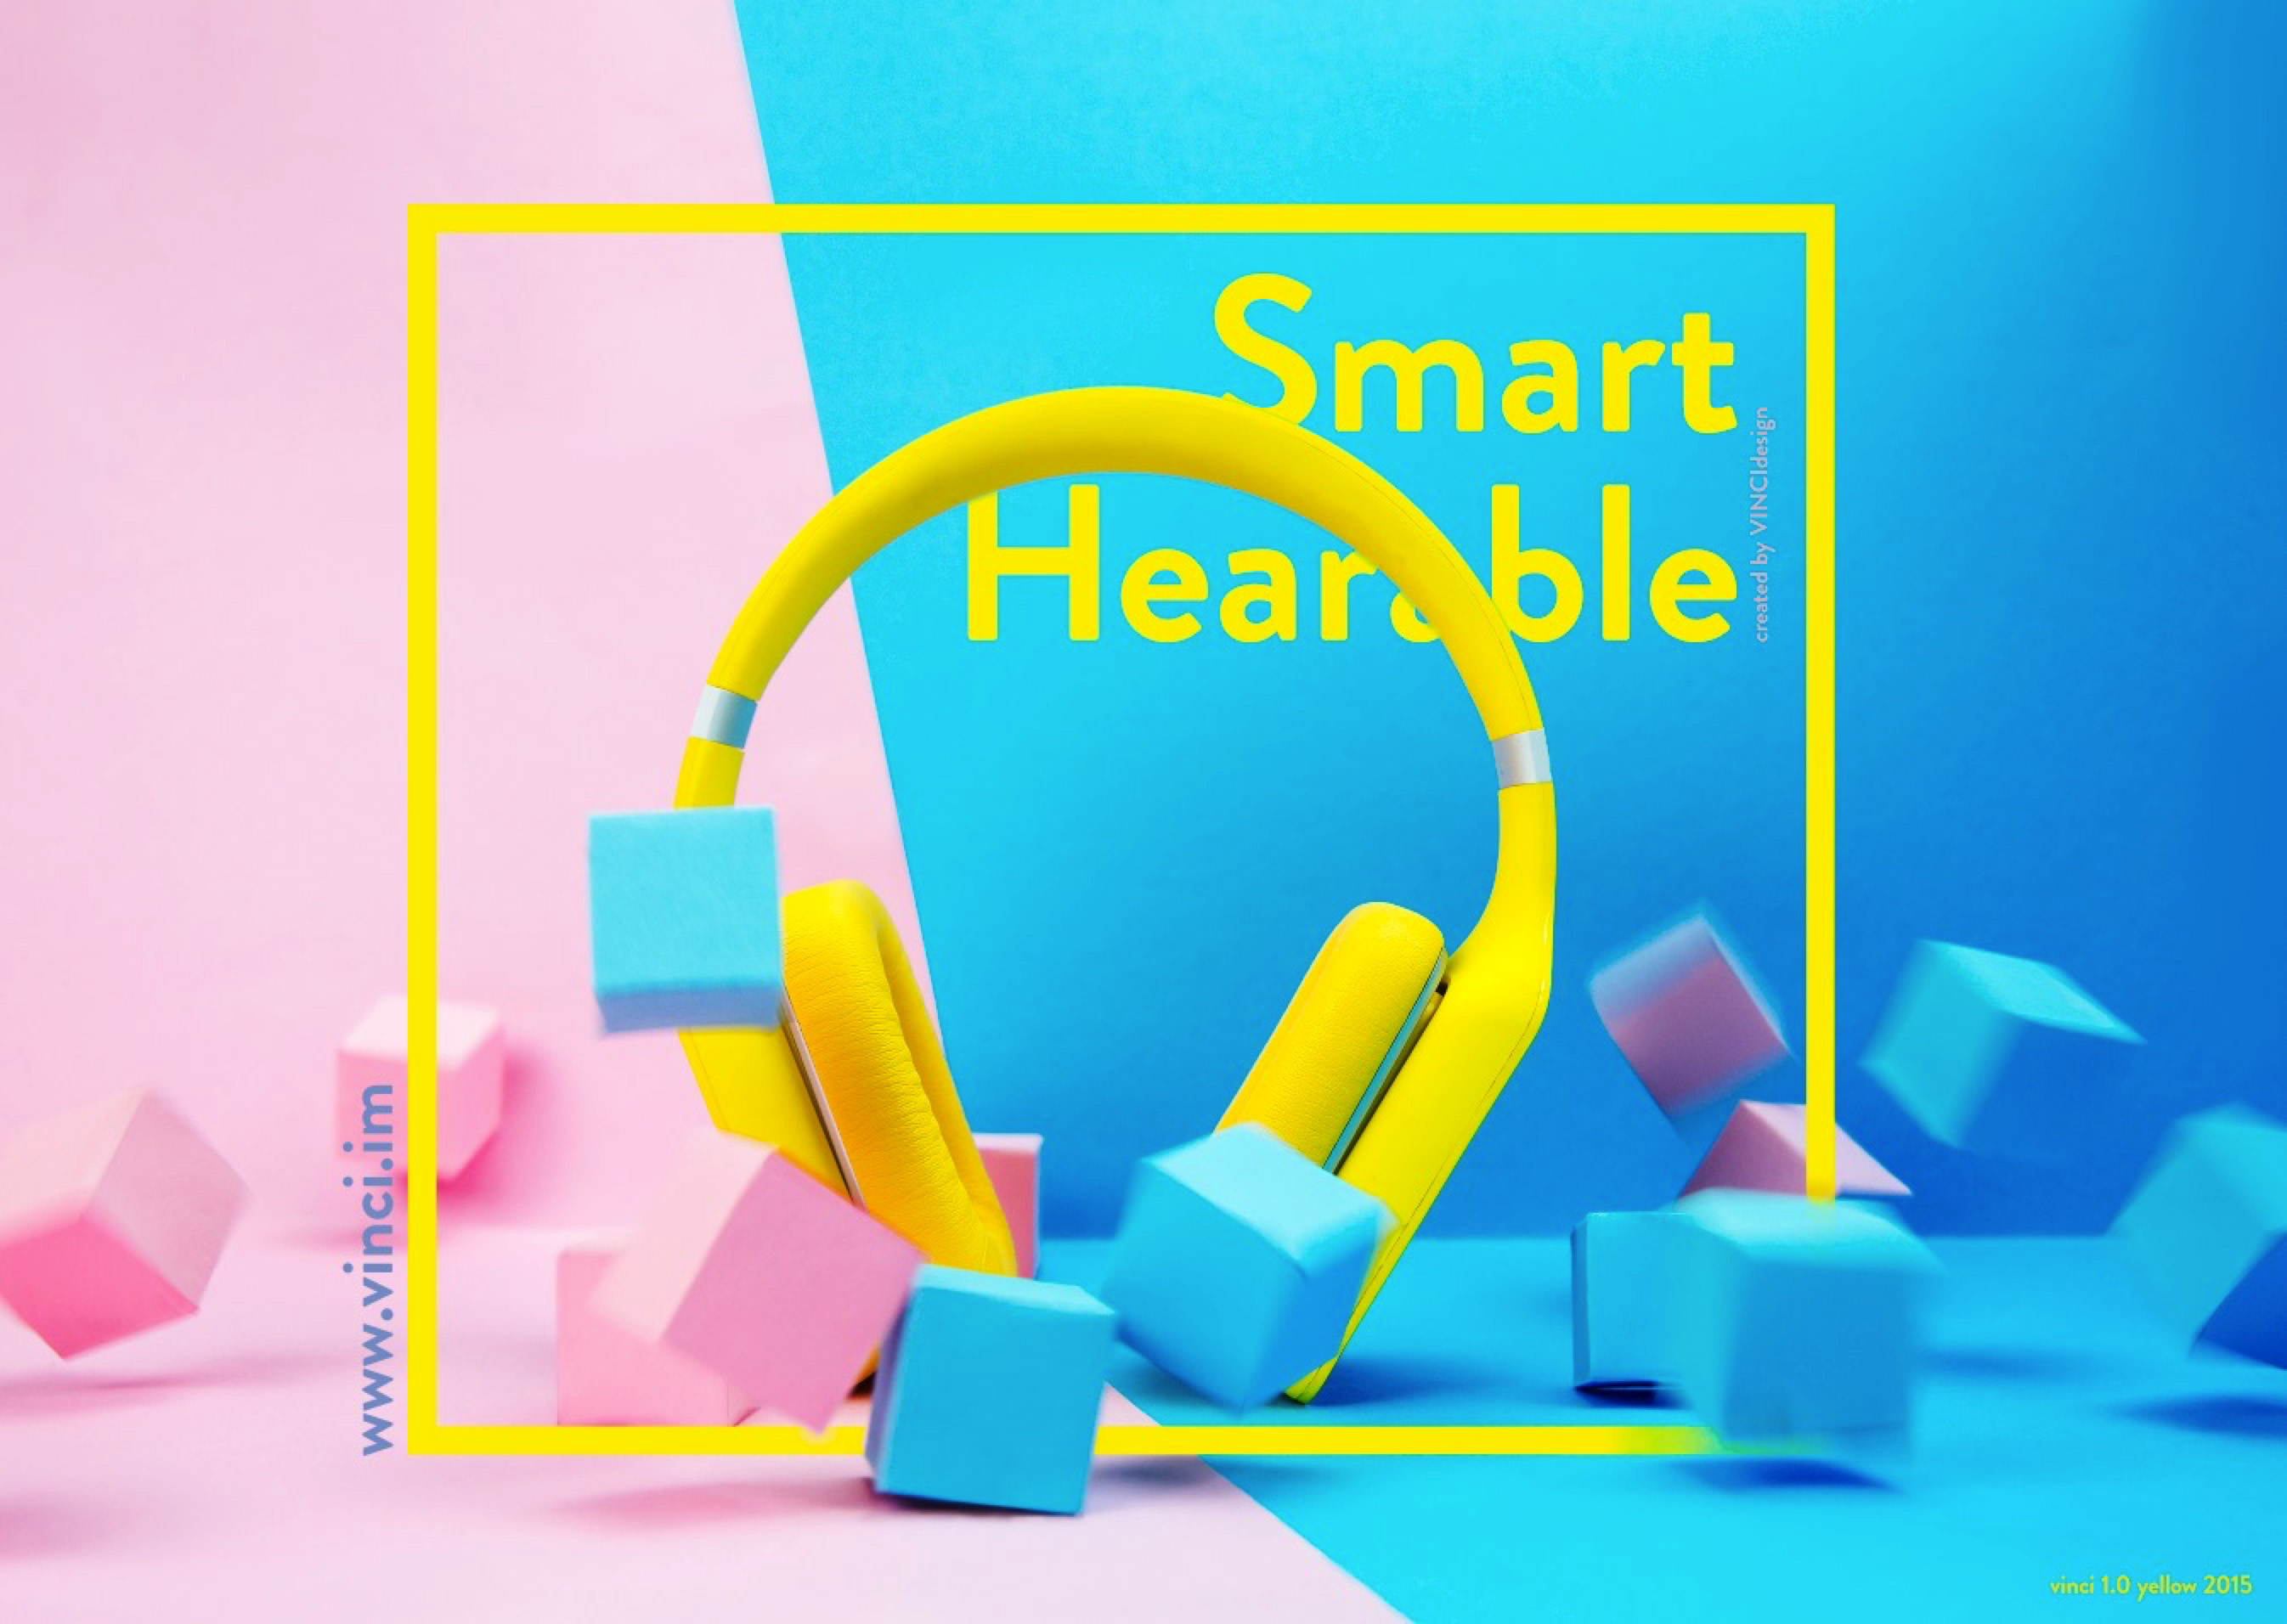 A VINCI Smart Hearable device in folk yellow from the official Facebook page of VINCI.